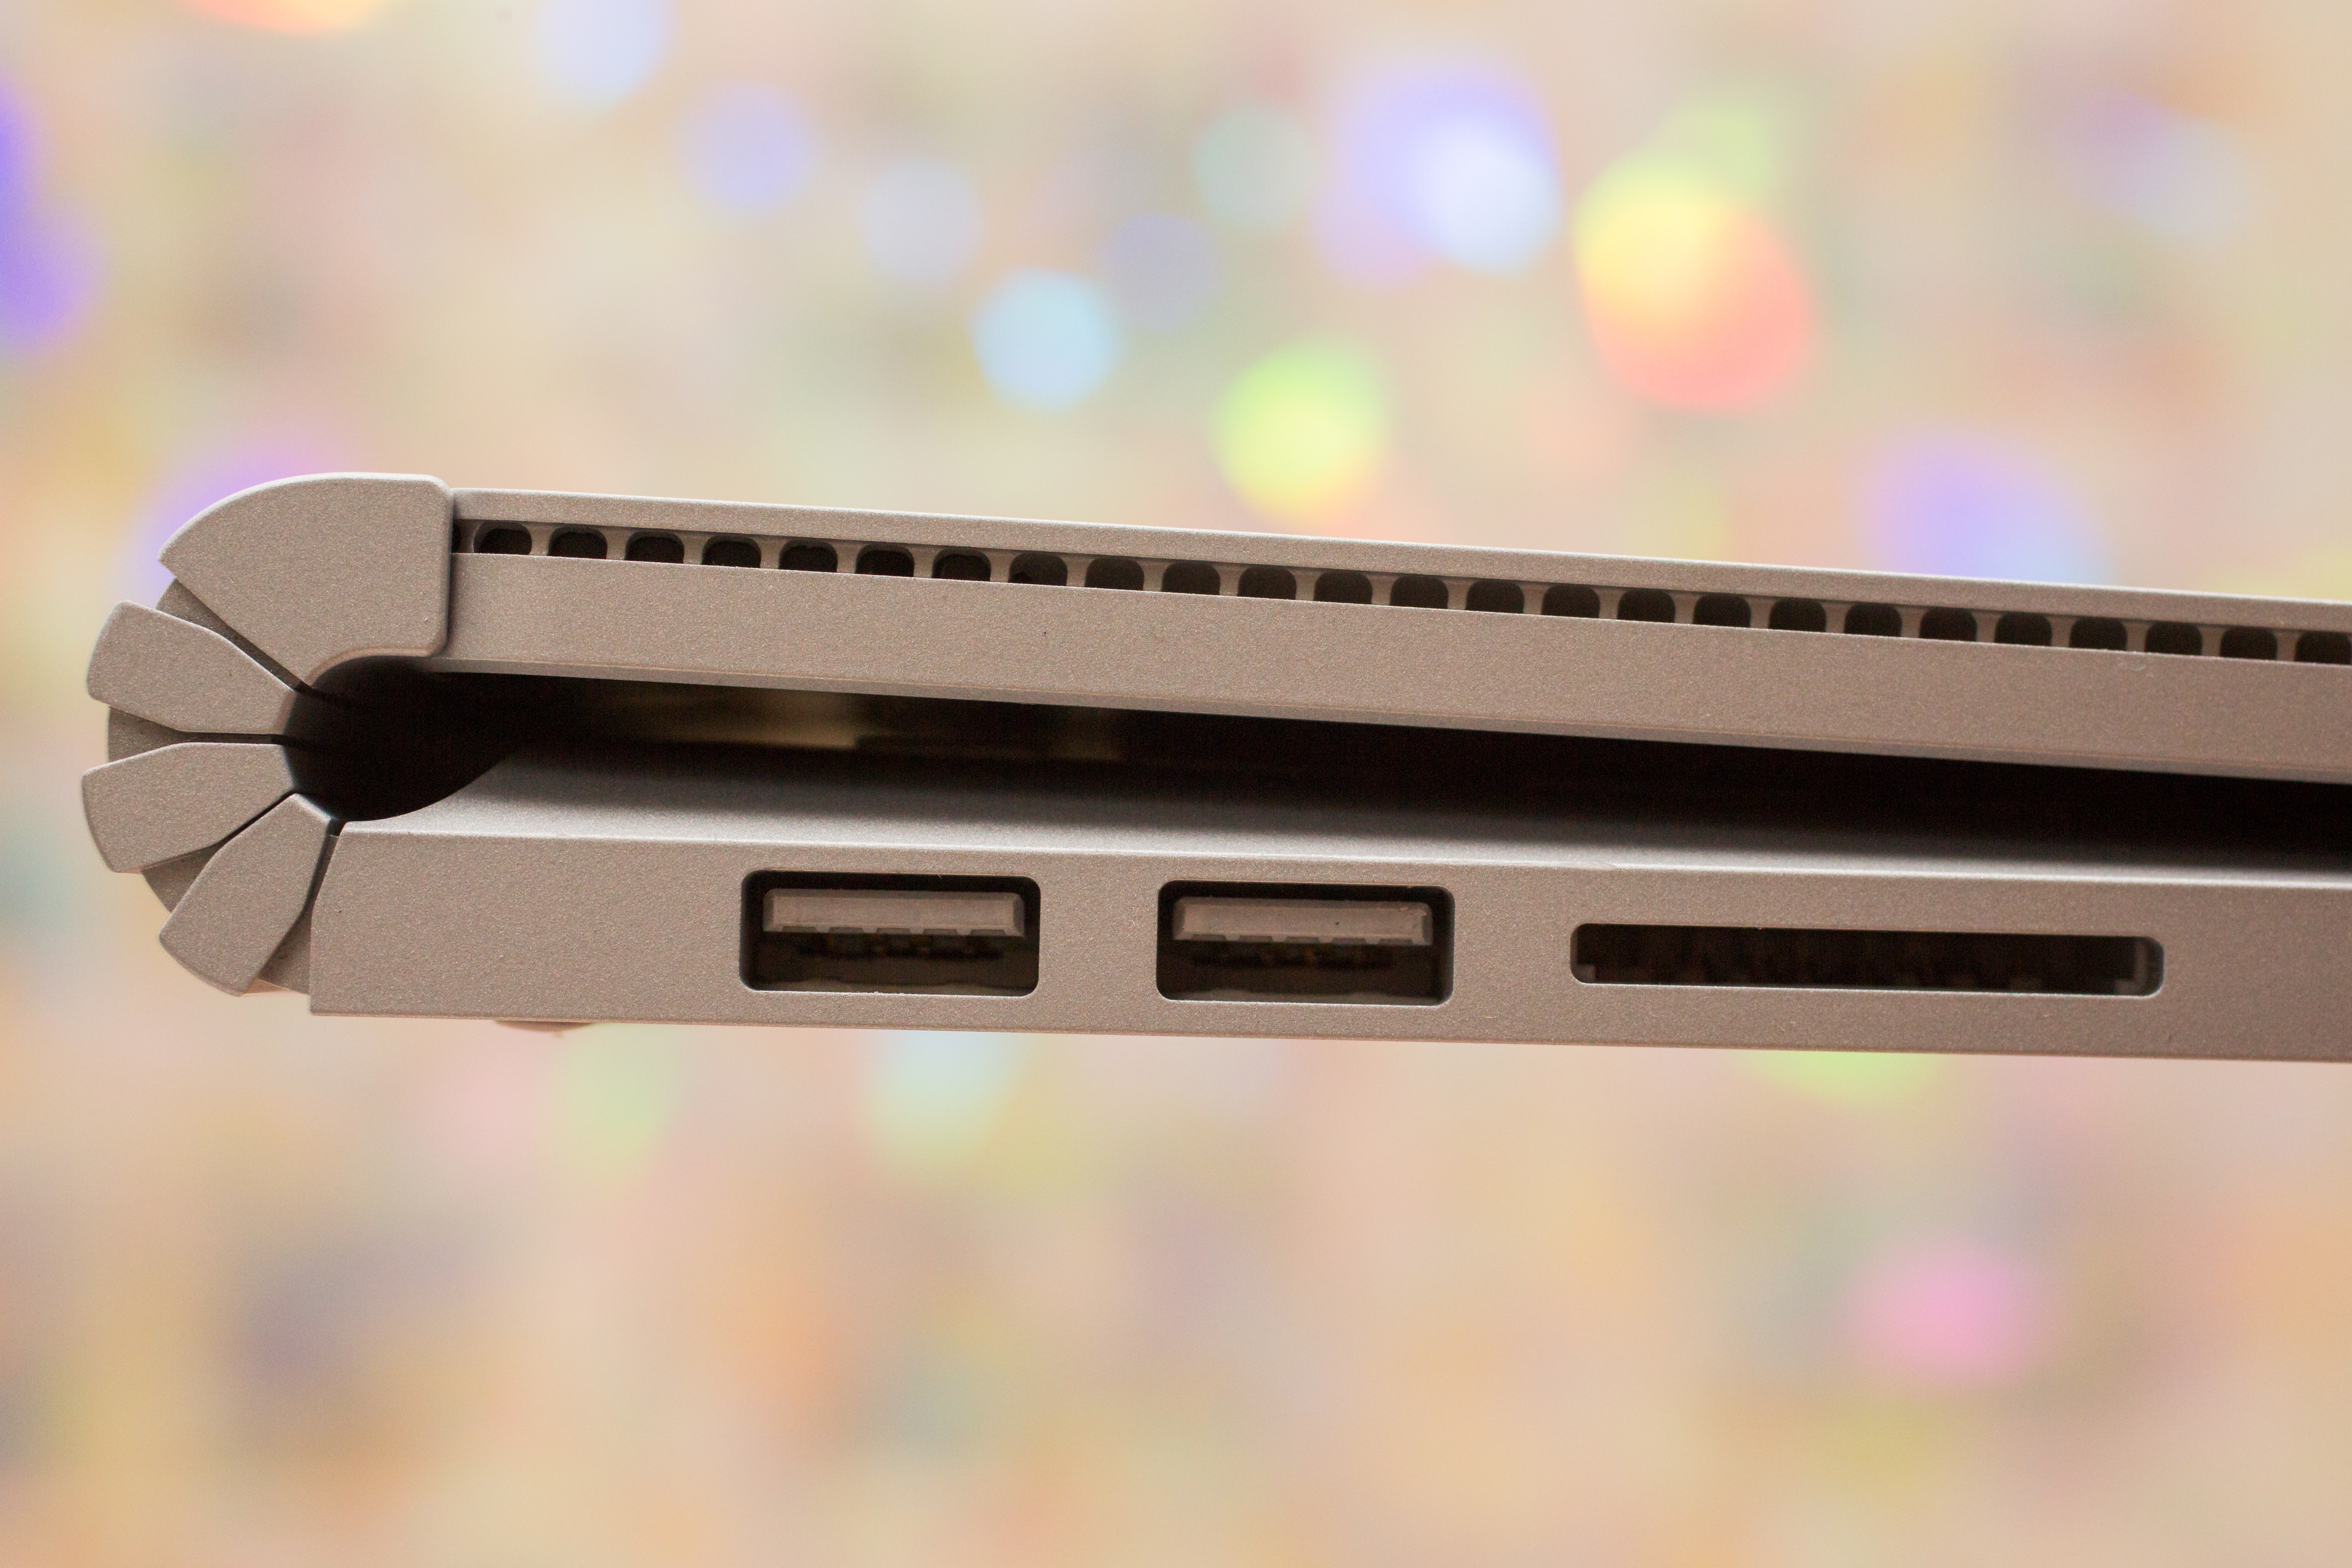 Microsoft Surface Book i7 (2016) review: All about that base - CNET